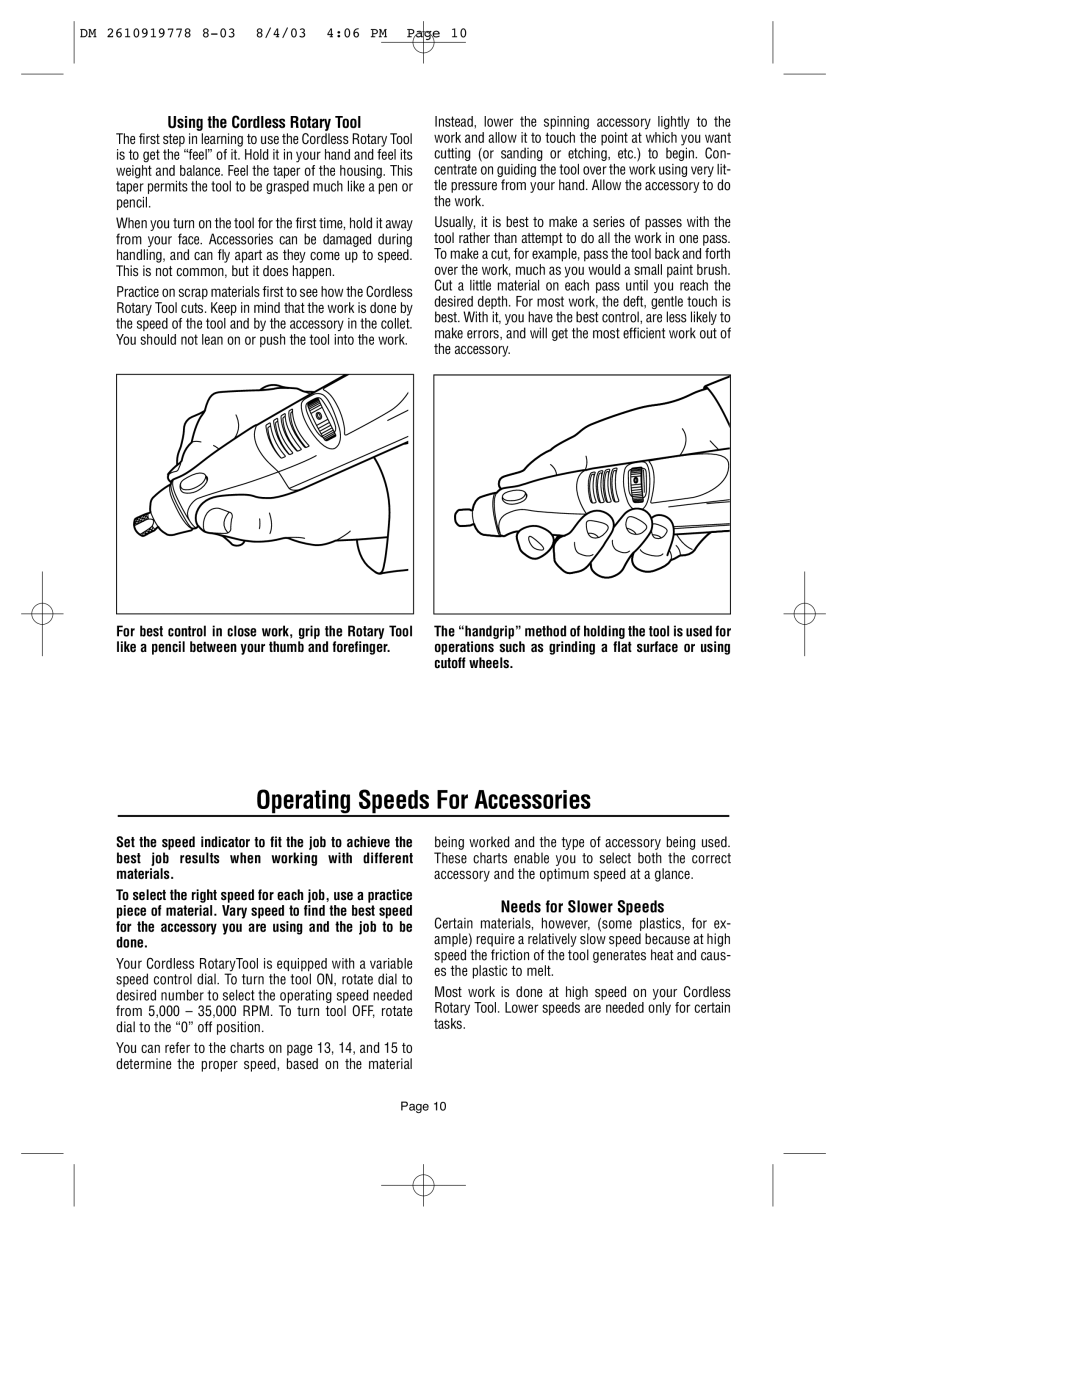 Dremel 800 owner manual Operating Speeds For Accessories, Using the Cordless Rotary Tool, Needs for Slower Speeds 